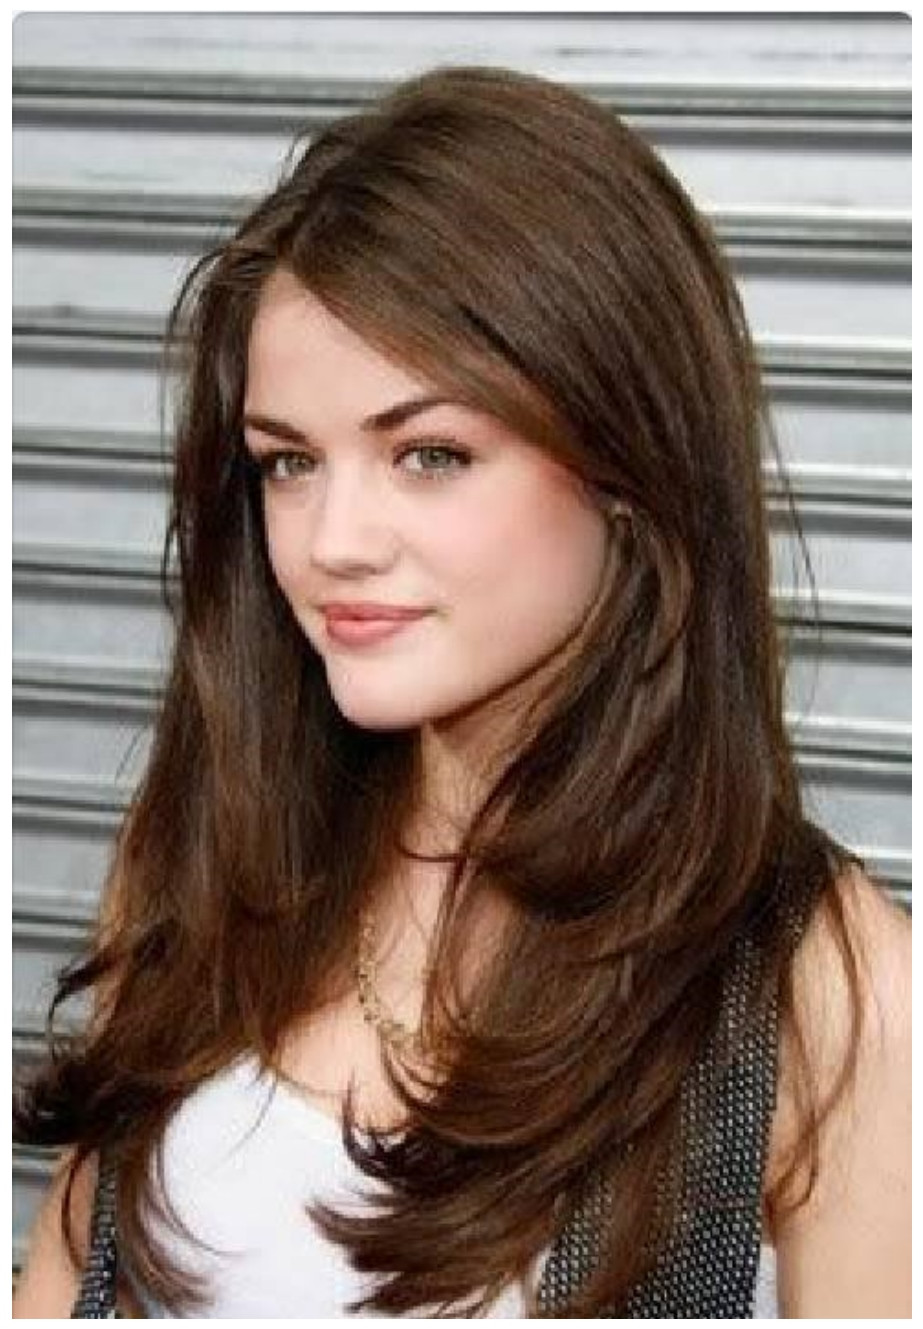 Girls Hair Cut Style
 Present Long Hairstyles Trends For Canadian La s